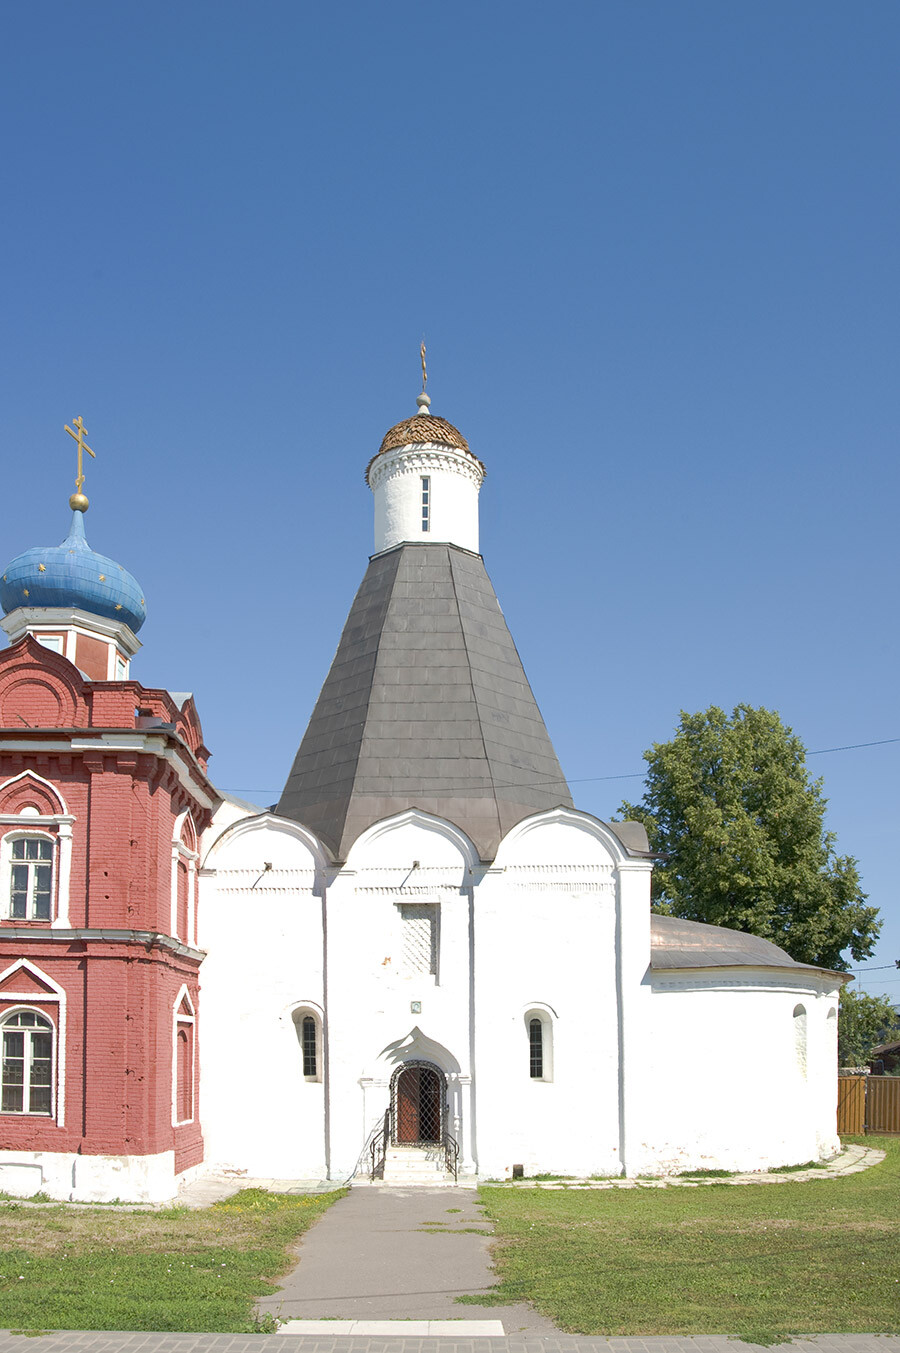 Kolomna. Church of Dormition of the Virgin, Brusensky Dormition Convent, south view. August 18, 2011.